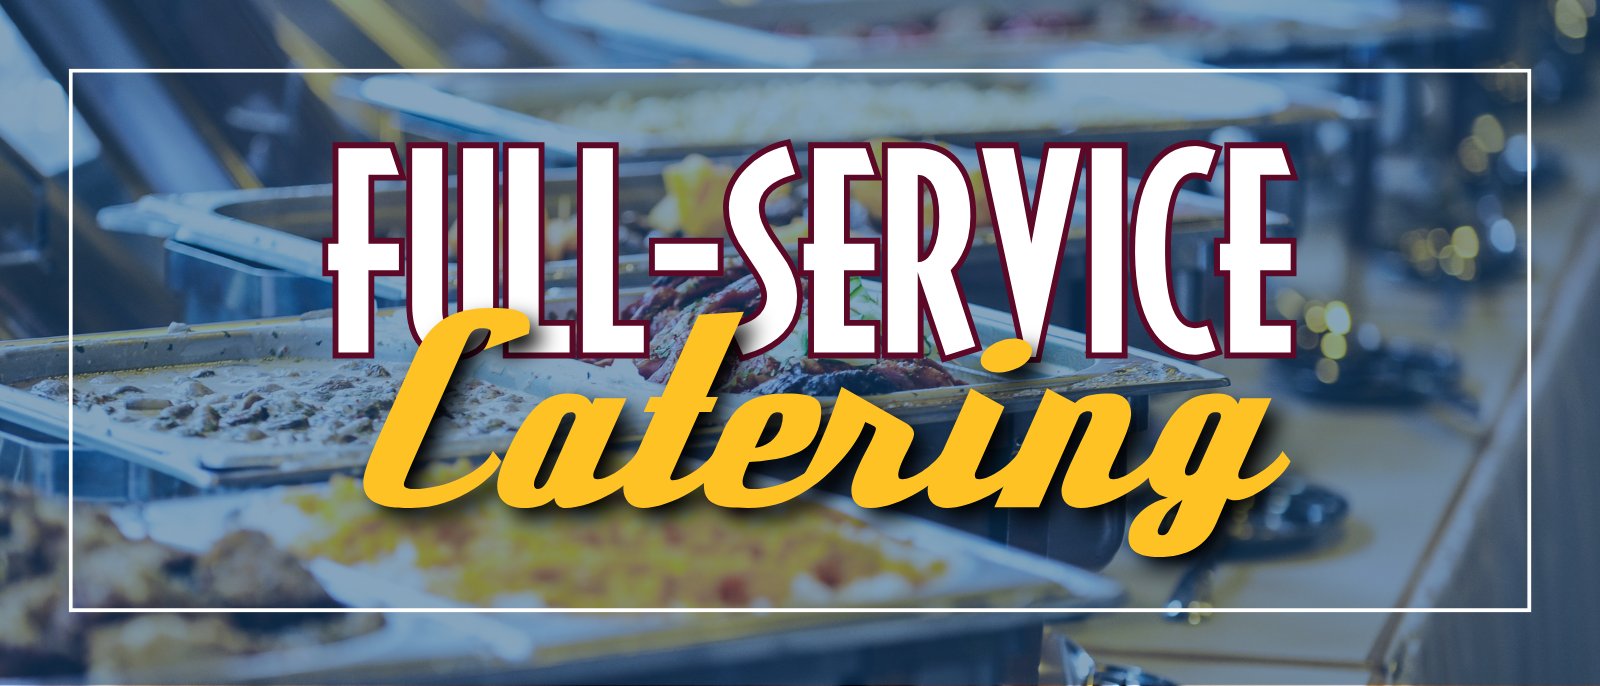 book Billy's full-service catering today